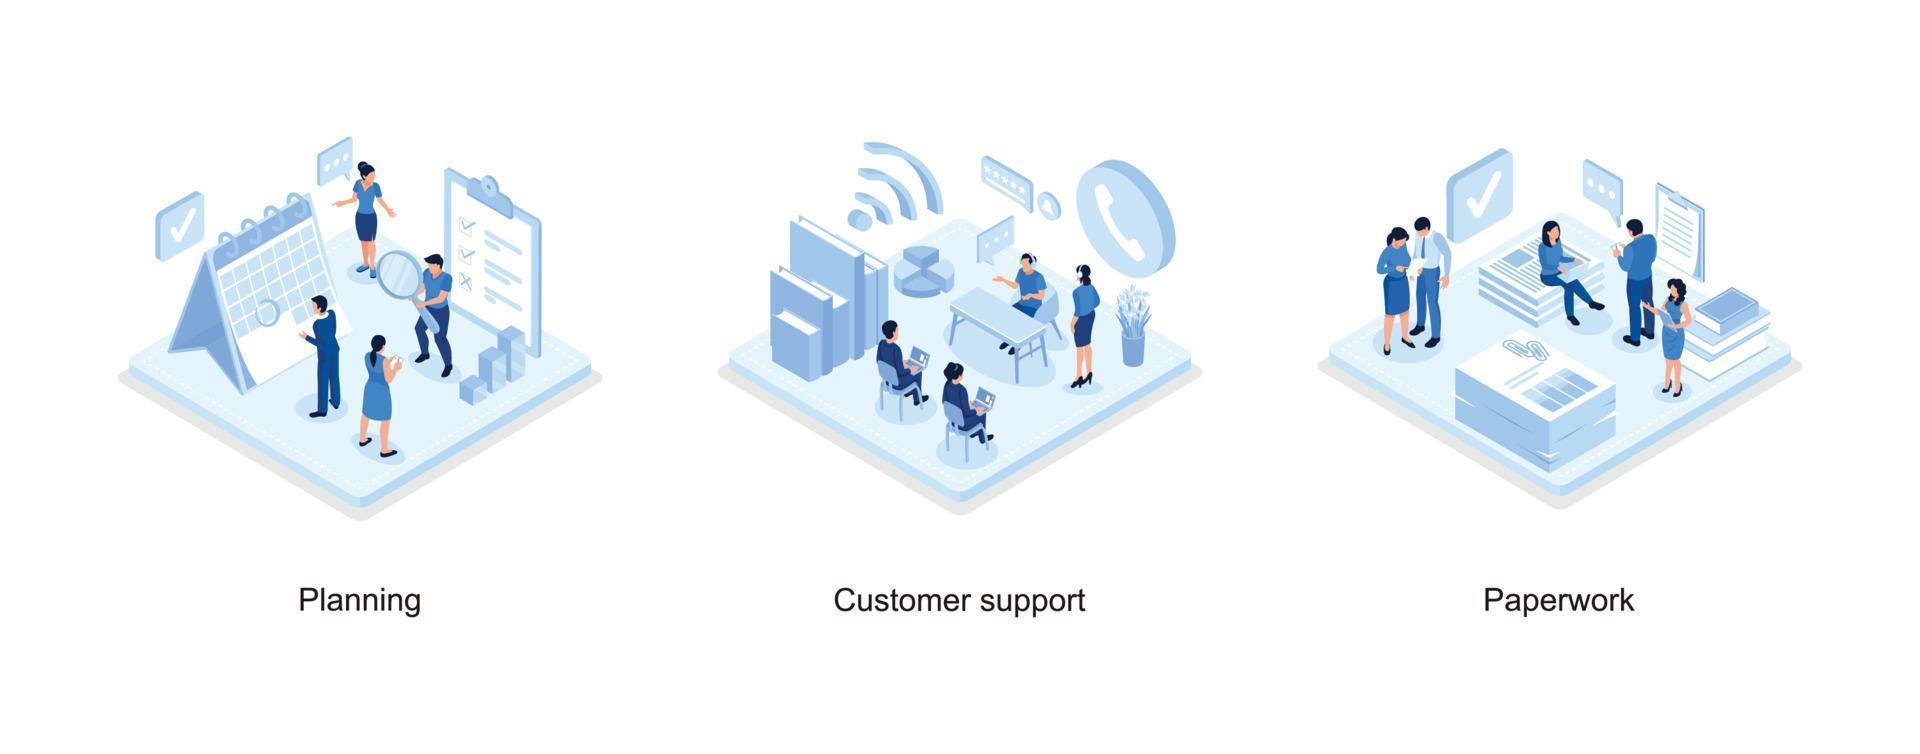 People Planing and Putting Check Mark on Laptop Screen, Customer support concept, People do paperwork concept design, set isometric vector illustration